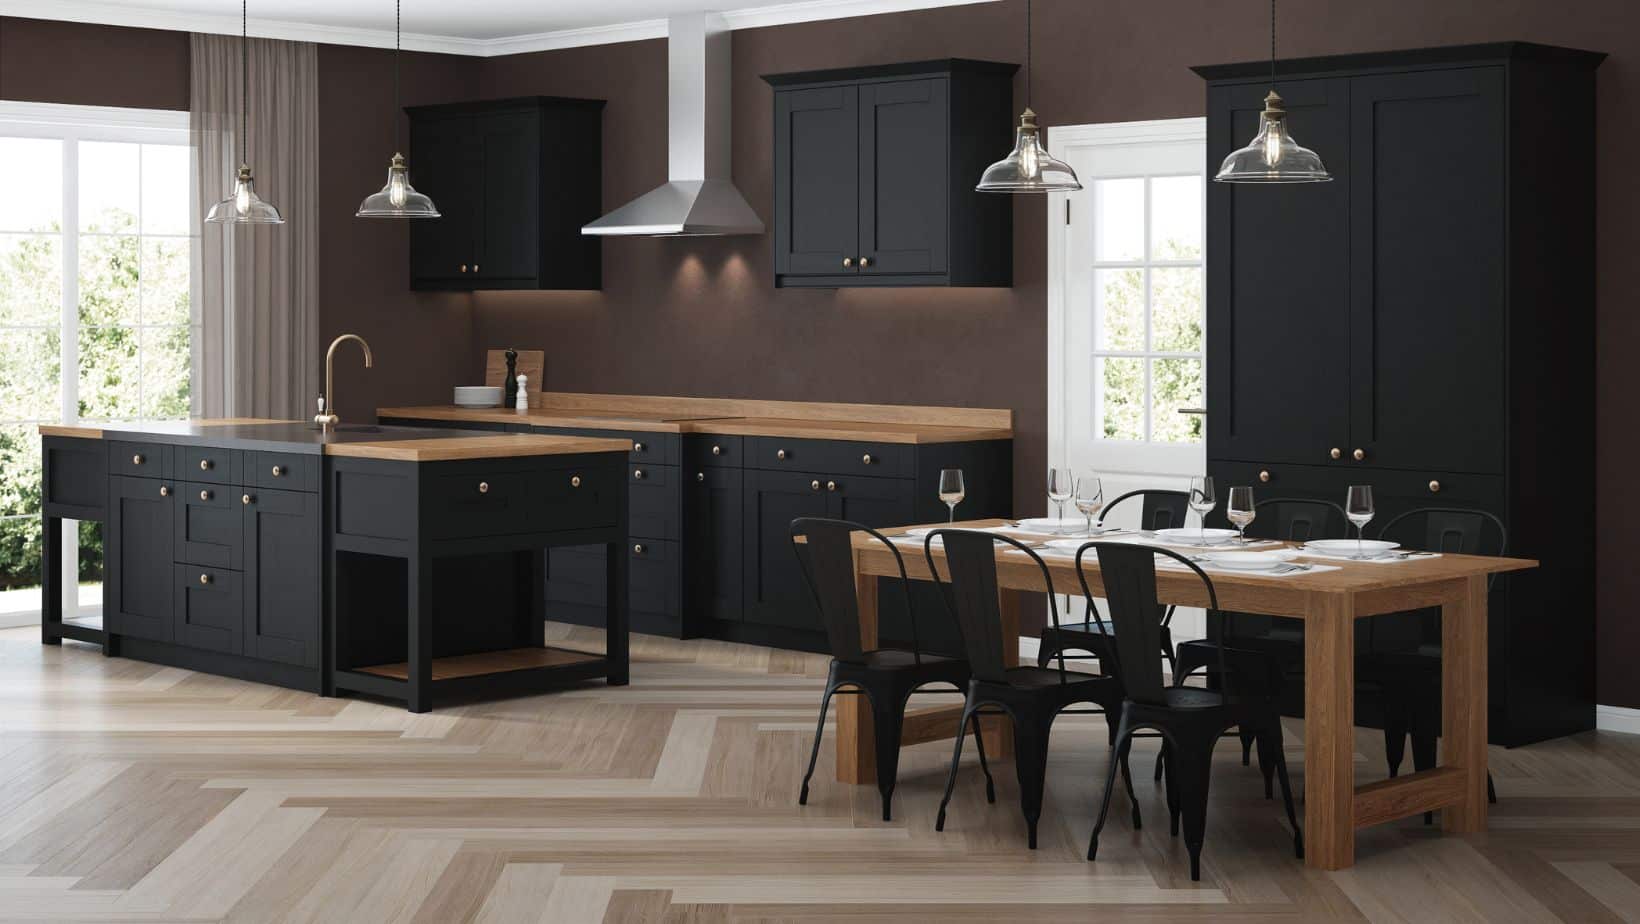 Black kitchen design with wood countertop